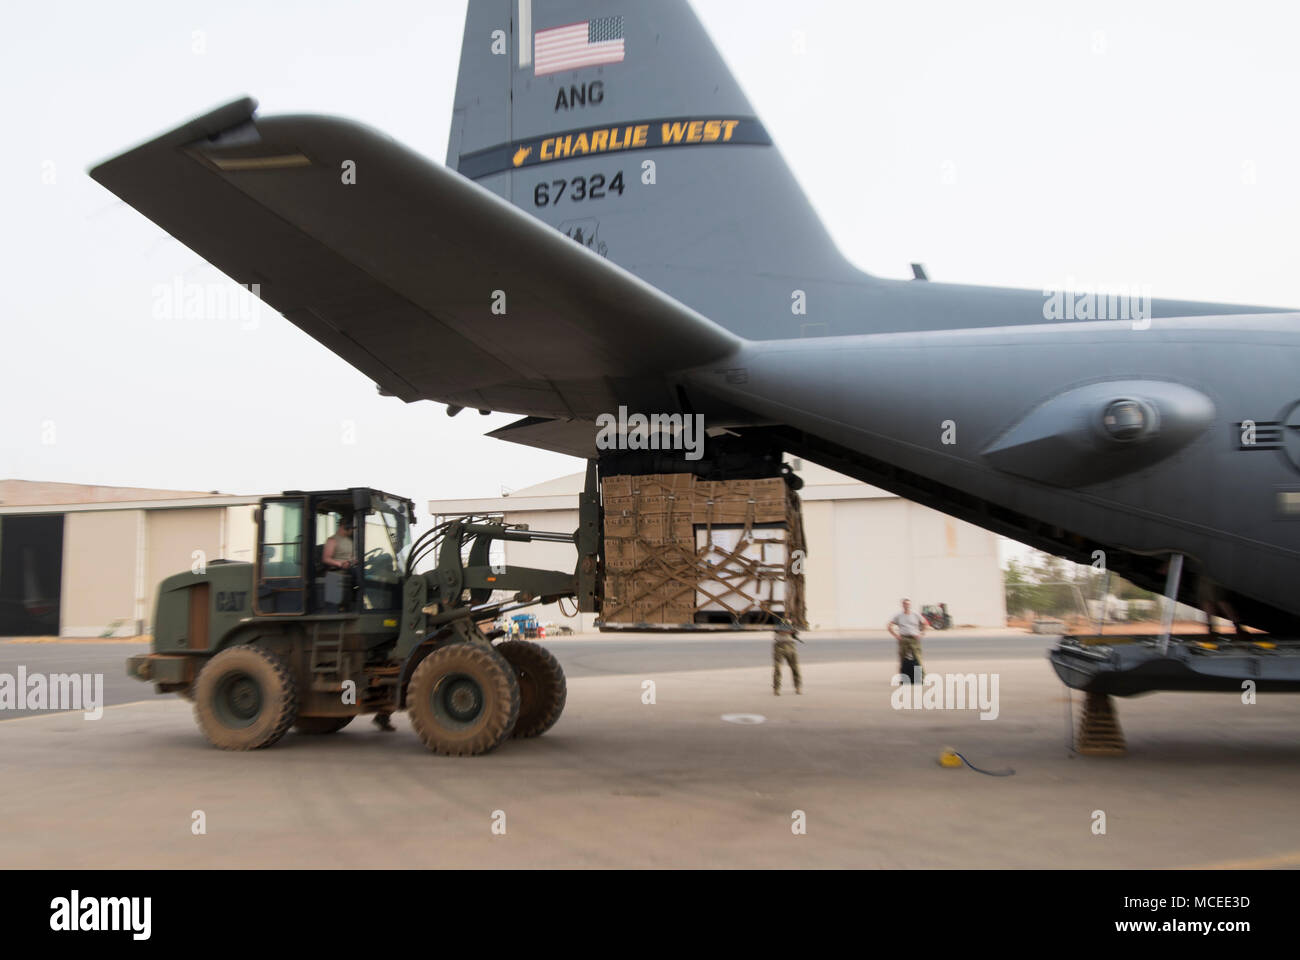 Members of the West Virginia Air National Guard load a C-130H Hercules April 10, 2018 at Diori Hamani International Airport, Niger. Approximately 1,900 service members from more than 20 African and western partner nations are participating in Flintlock 2018 at multiple locations in Niger, Burkina Faso, and Senegal. Flintlock is an annual, African-led, integrated military and law enforcement exercise that has strengthened key partner nation forces throughout North and West Africa as well as western Special Operations Forces since 2005.  (U.S. Air Force photo/Senior Airman Clayton Cupit) Stock Photo